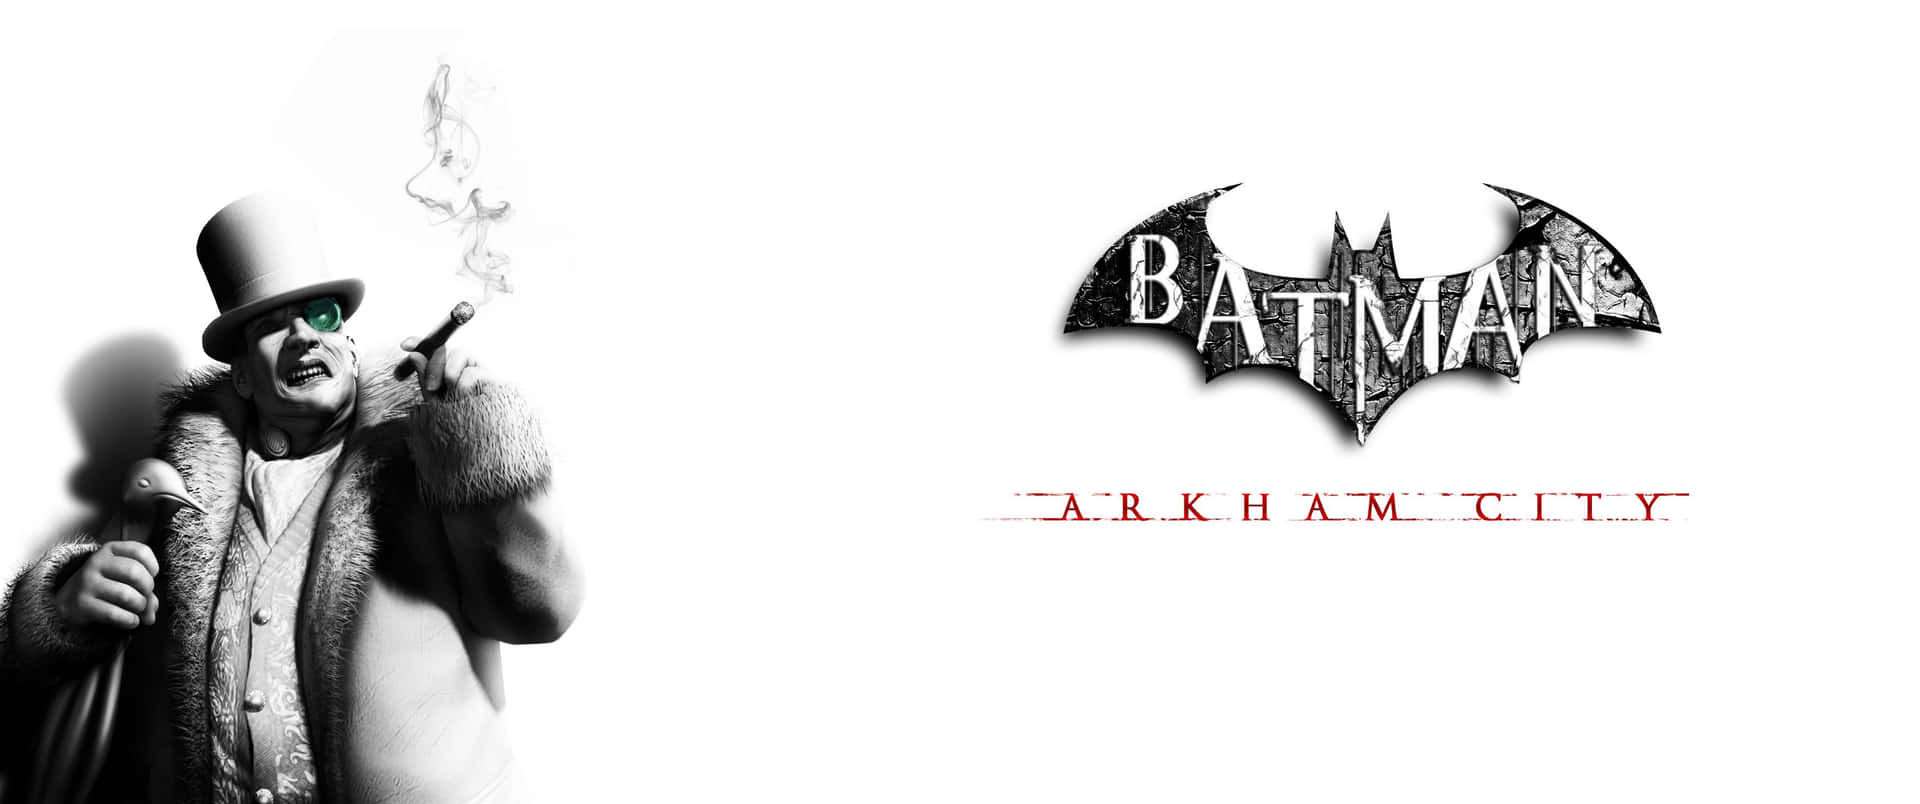 Experience Gotham City in stunning detail with 3440x1440p Batman Arkham City